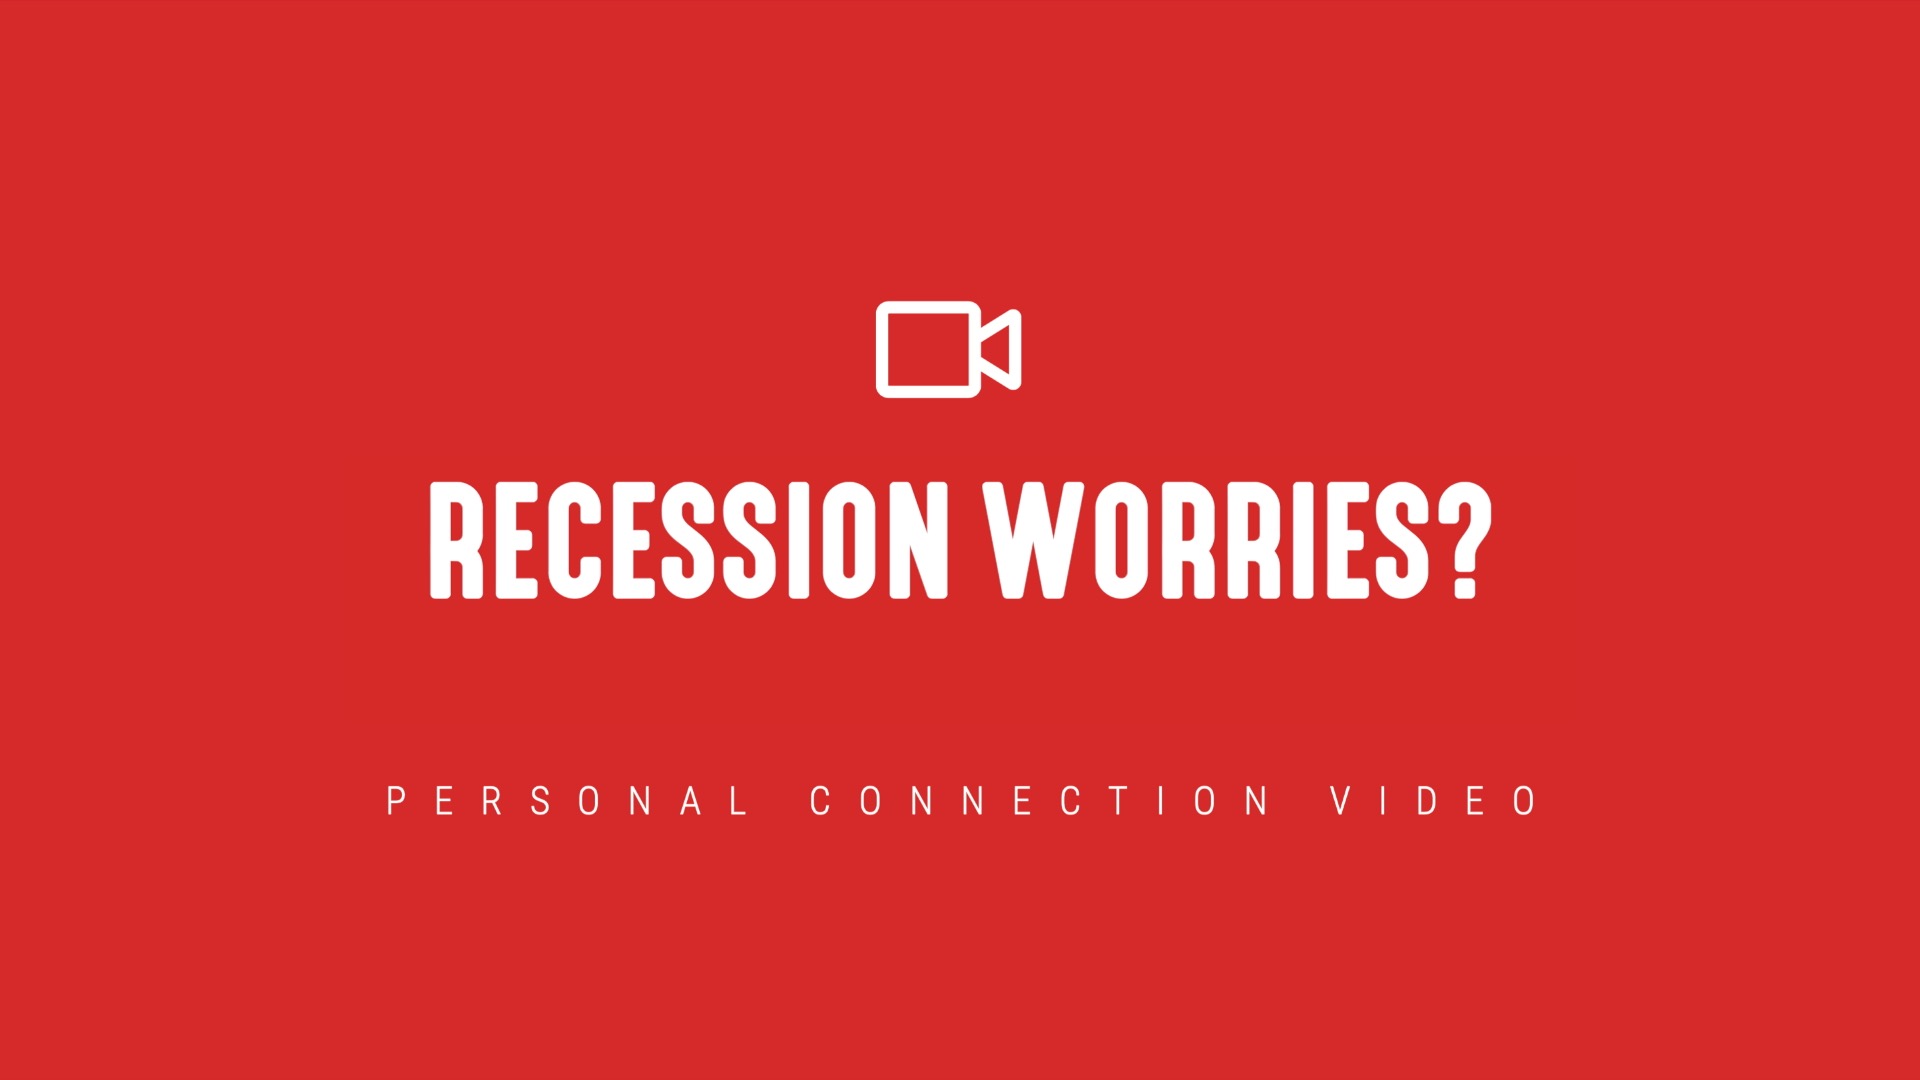 [NEW] Personal Connection Videos | Recession Worries?